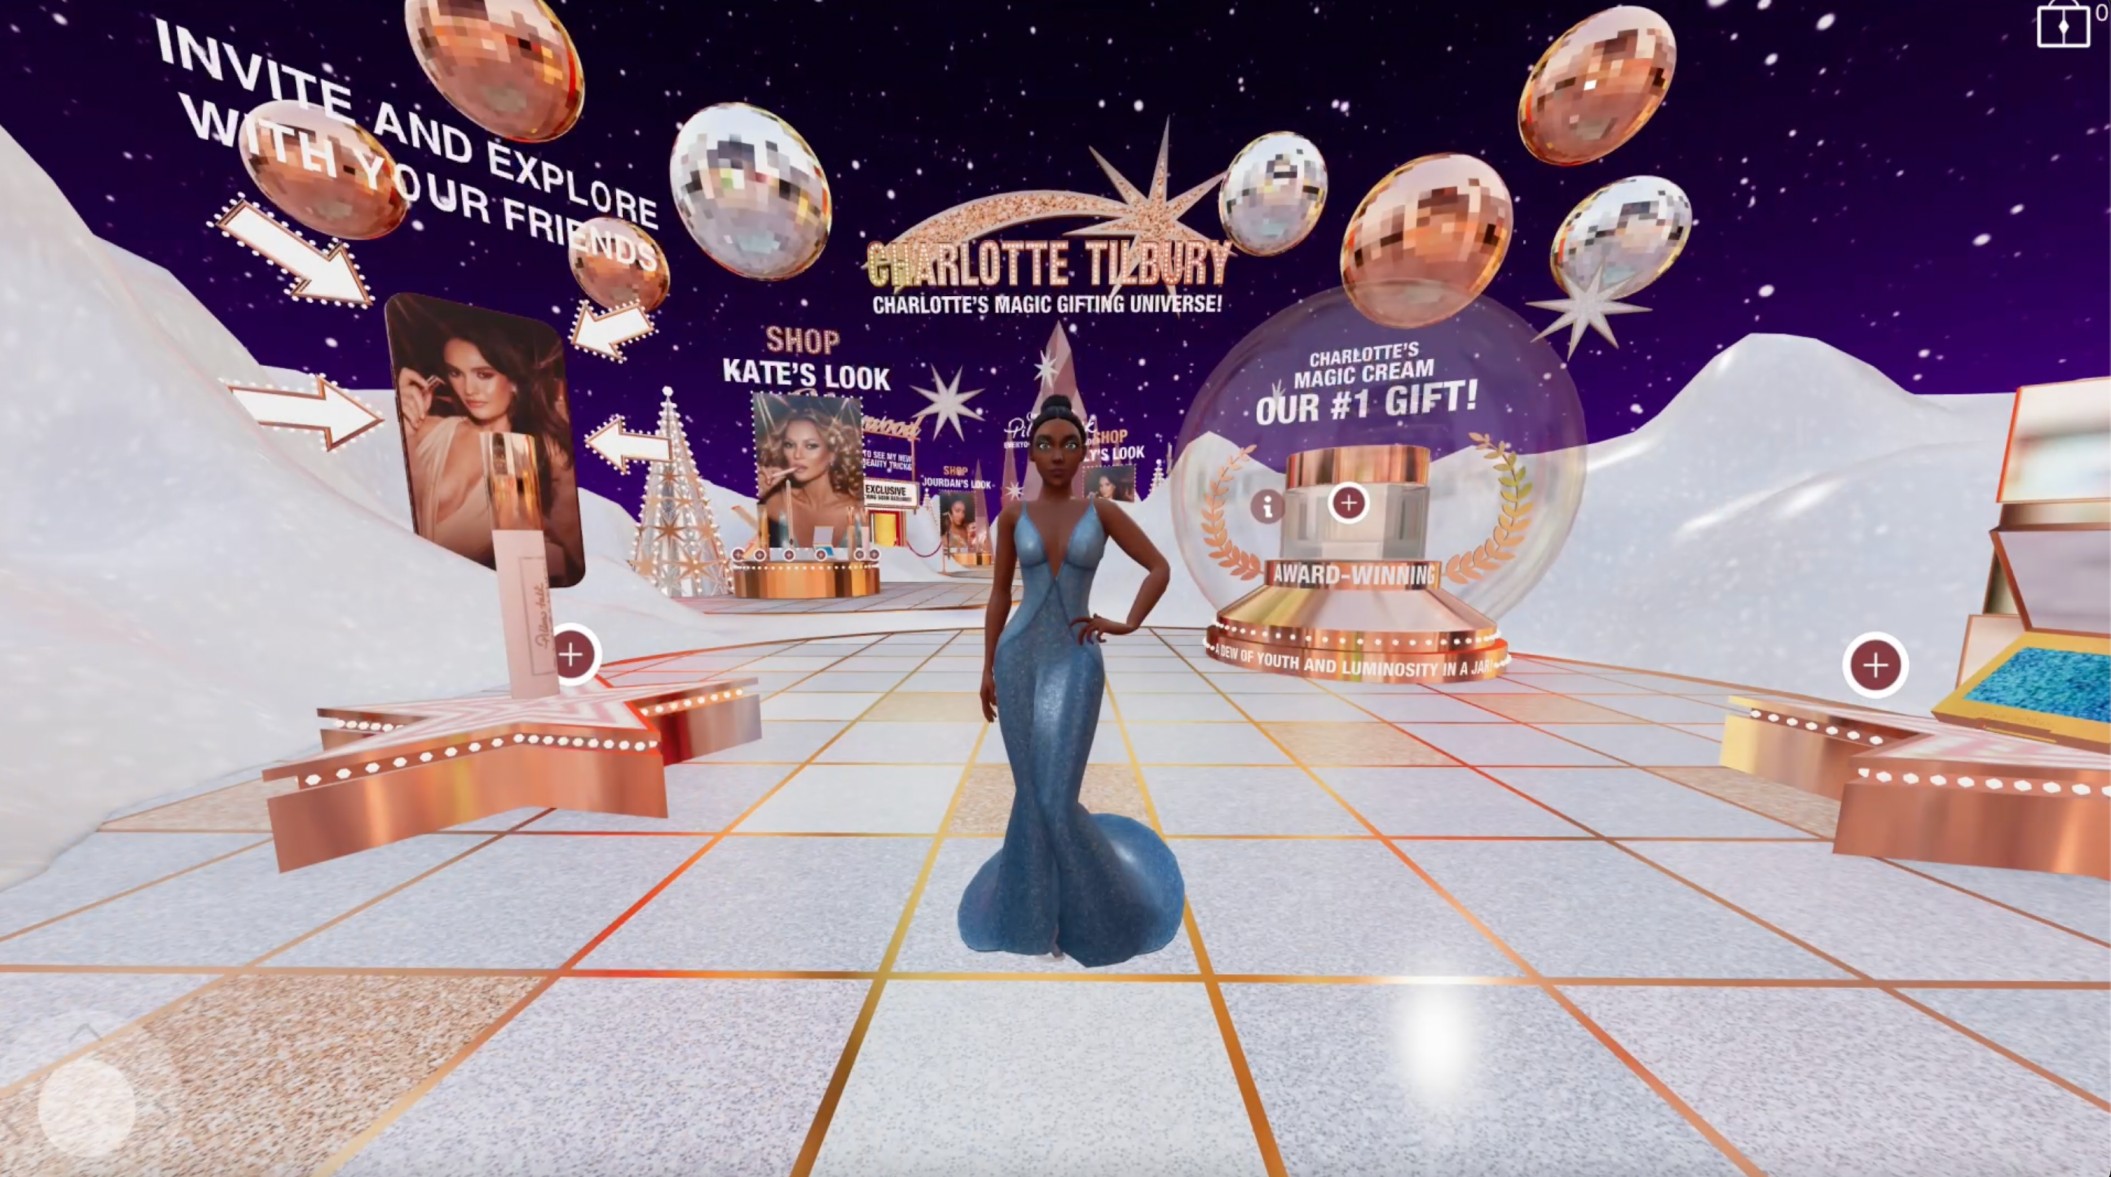 Avatar standing in the Charlotte Tilbury Beauty Realm holiday wonderland